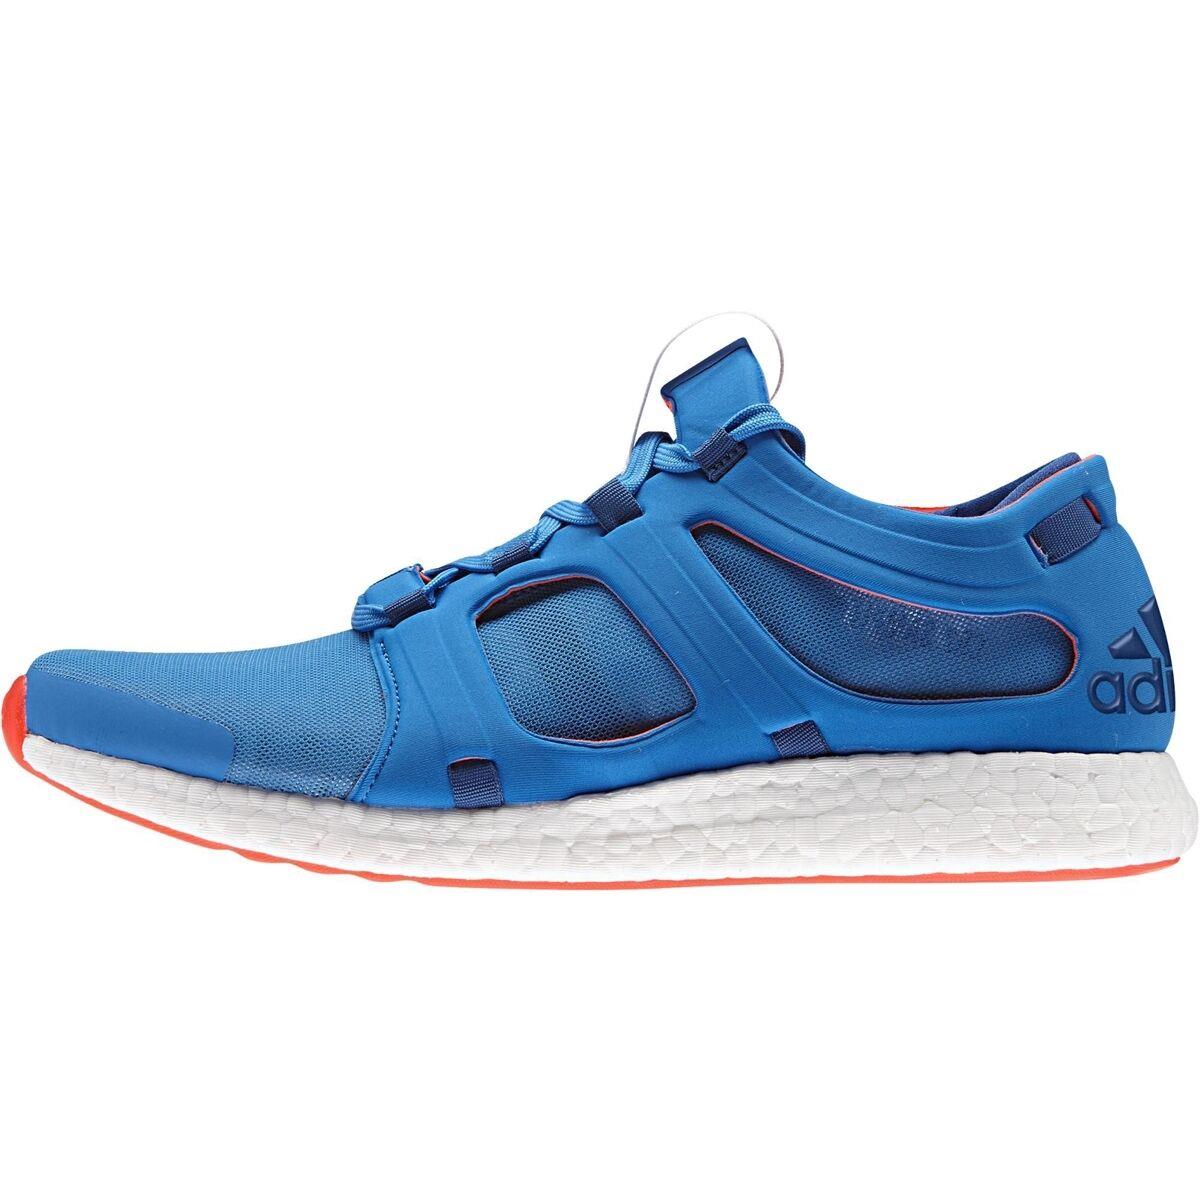 Men Adidas Climachill Rocket Running Shoes Adidas Clima Cool Shoes Blue